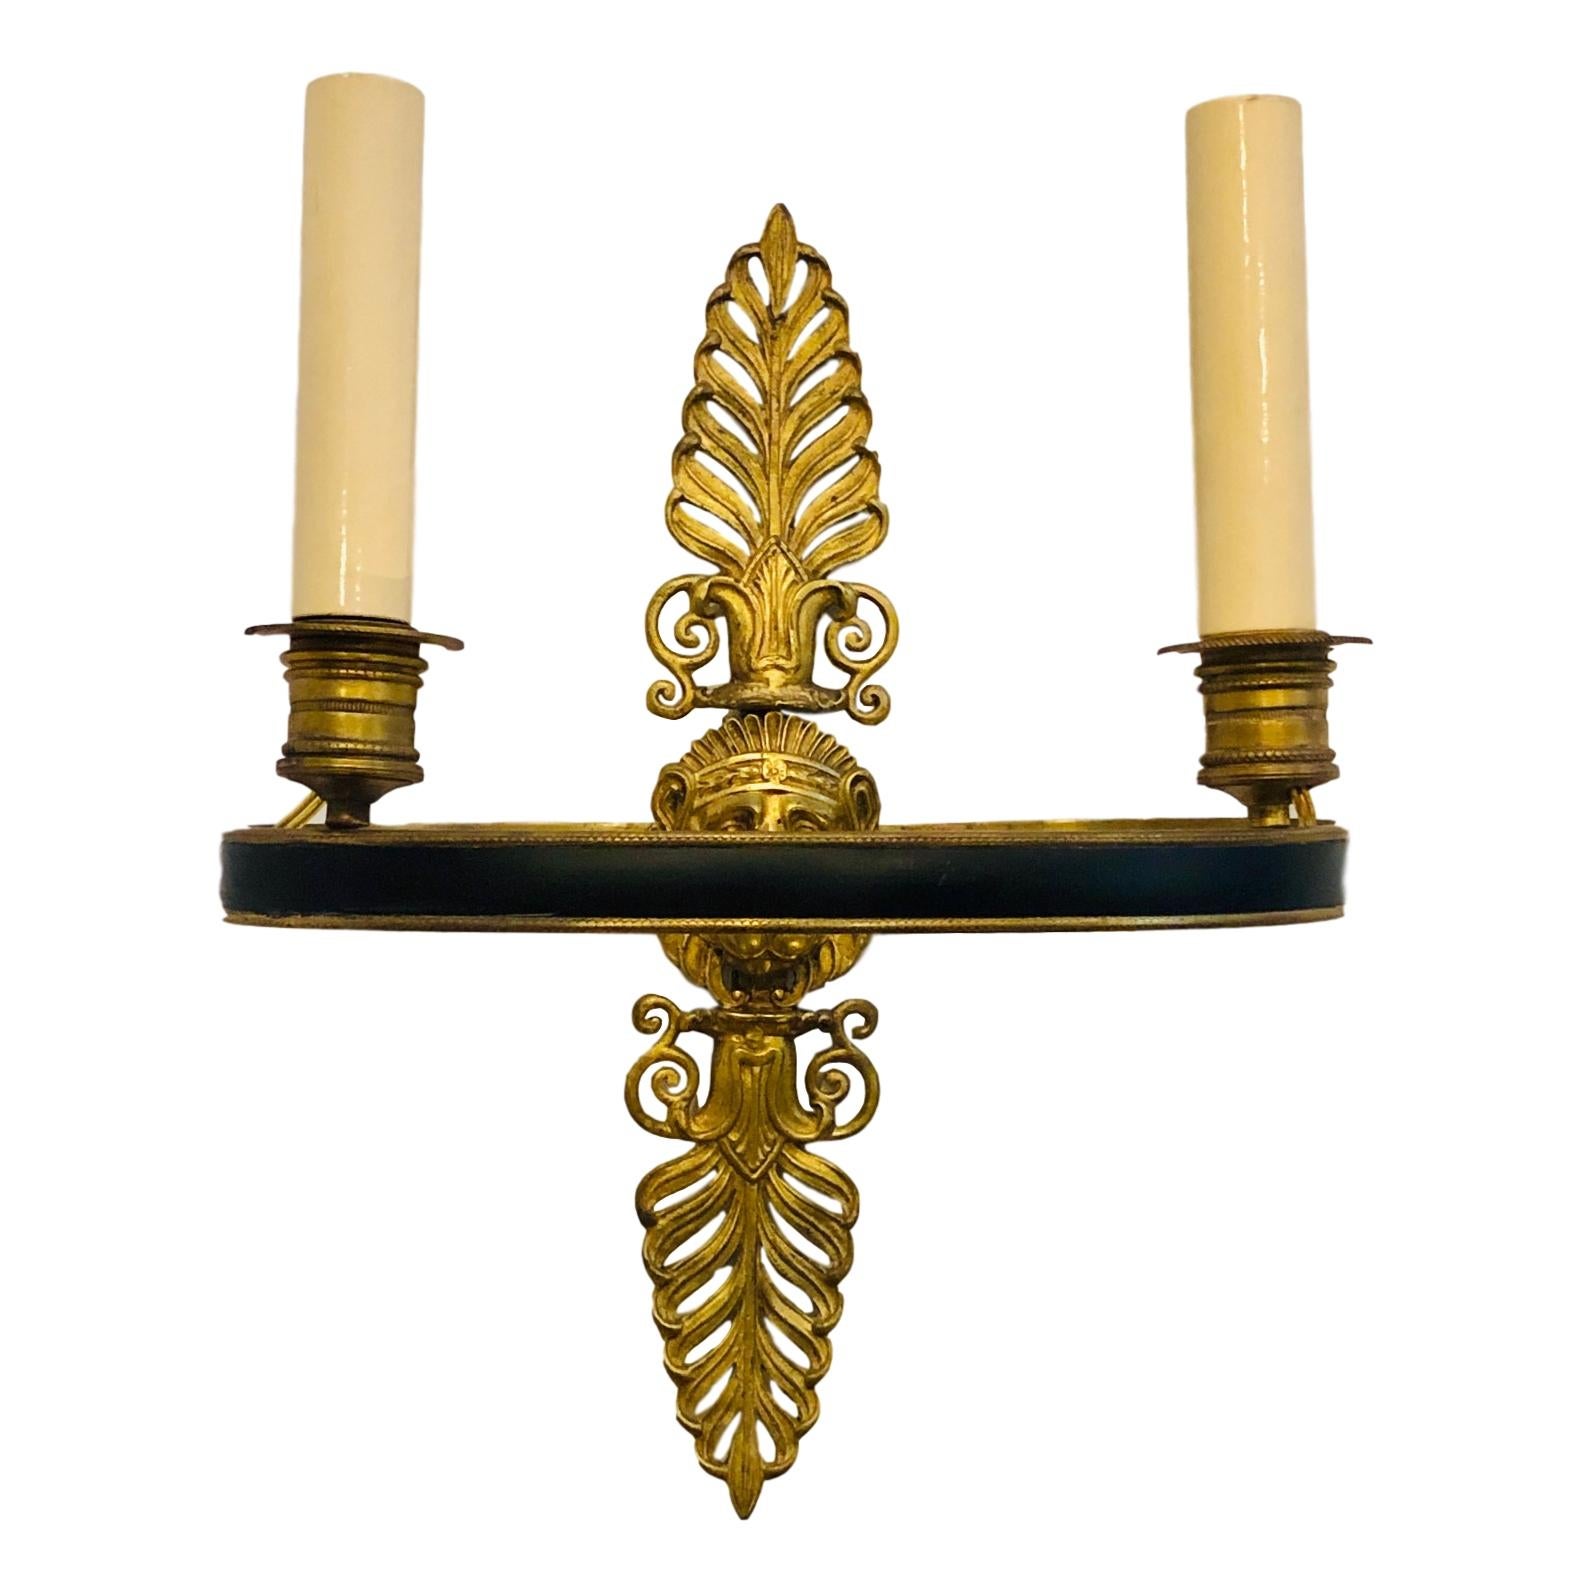 Pair of circa 1920's French Empire style two-light sconces.

Measurements:
Height: 11.5